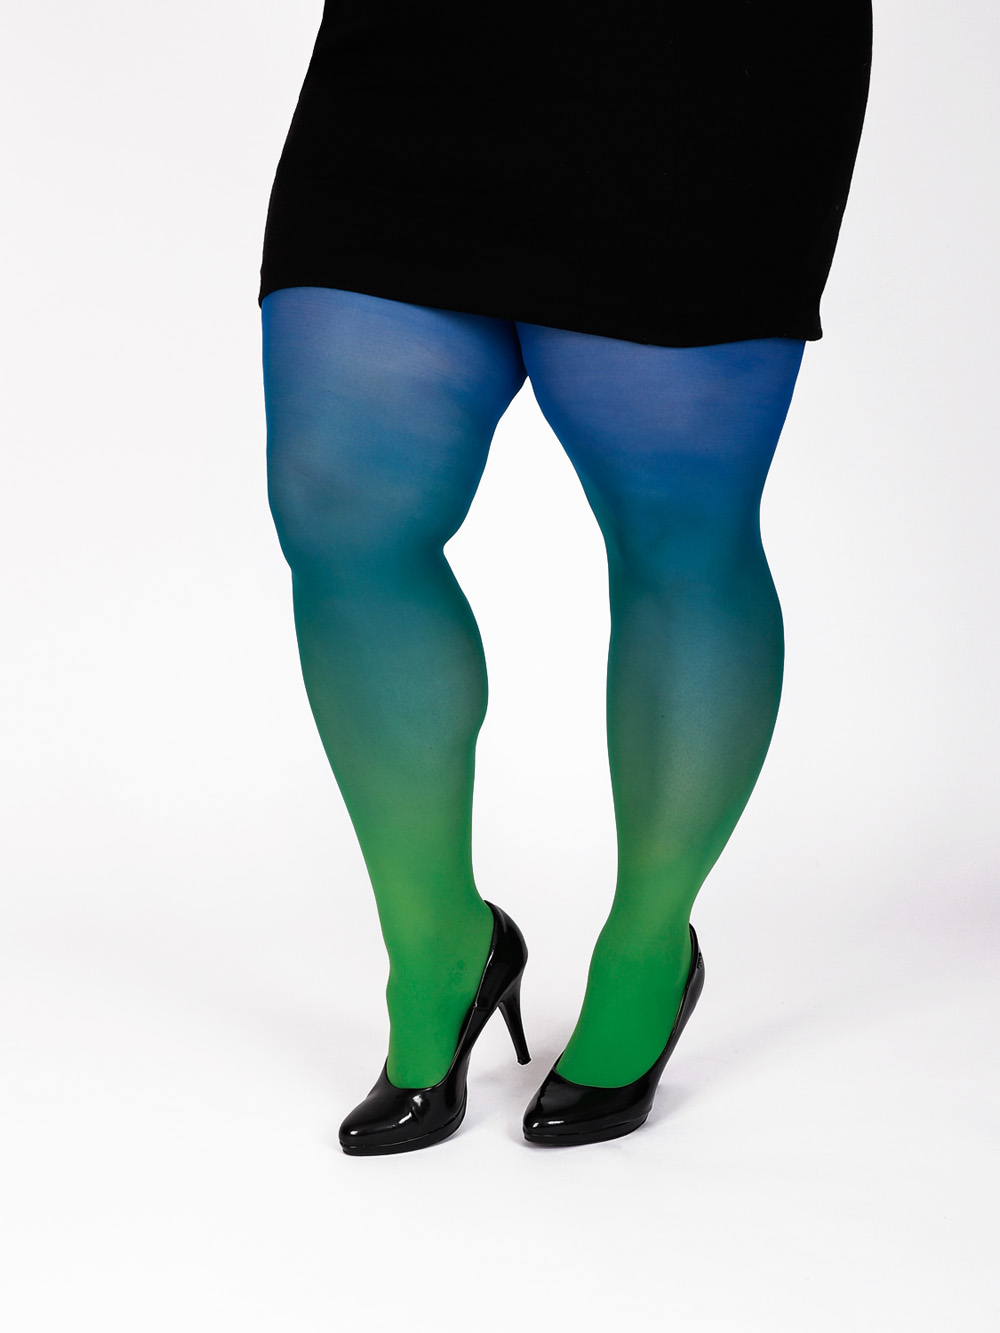 Plus size green-blue tights - Virivee Tights - Unique tights designed and  made in Europe